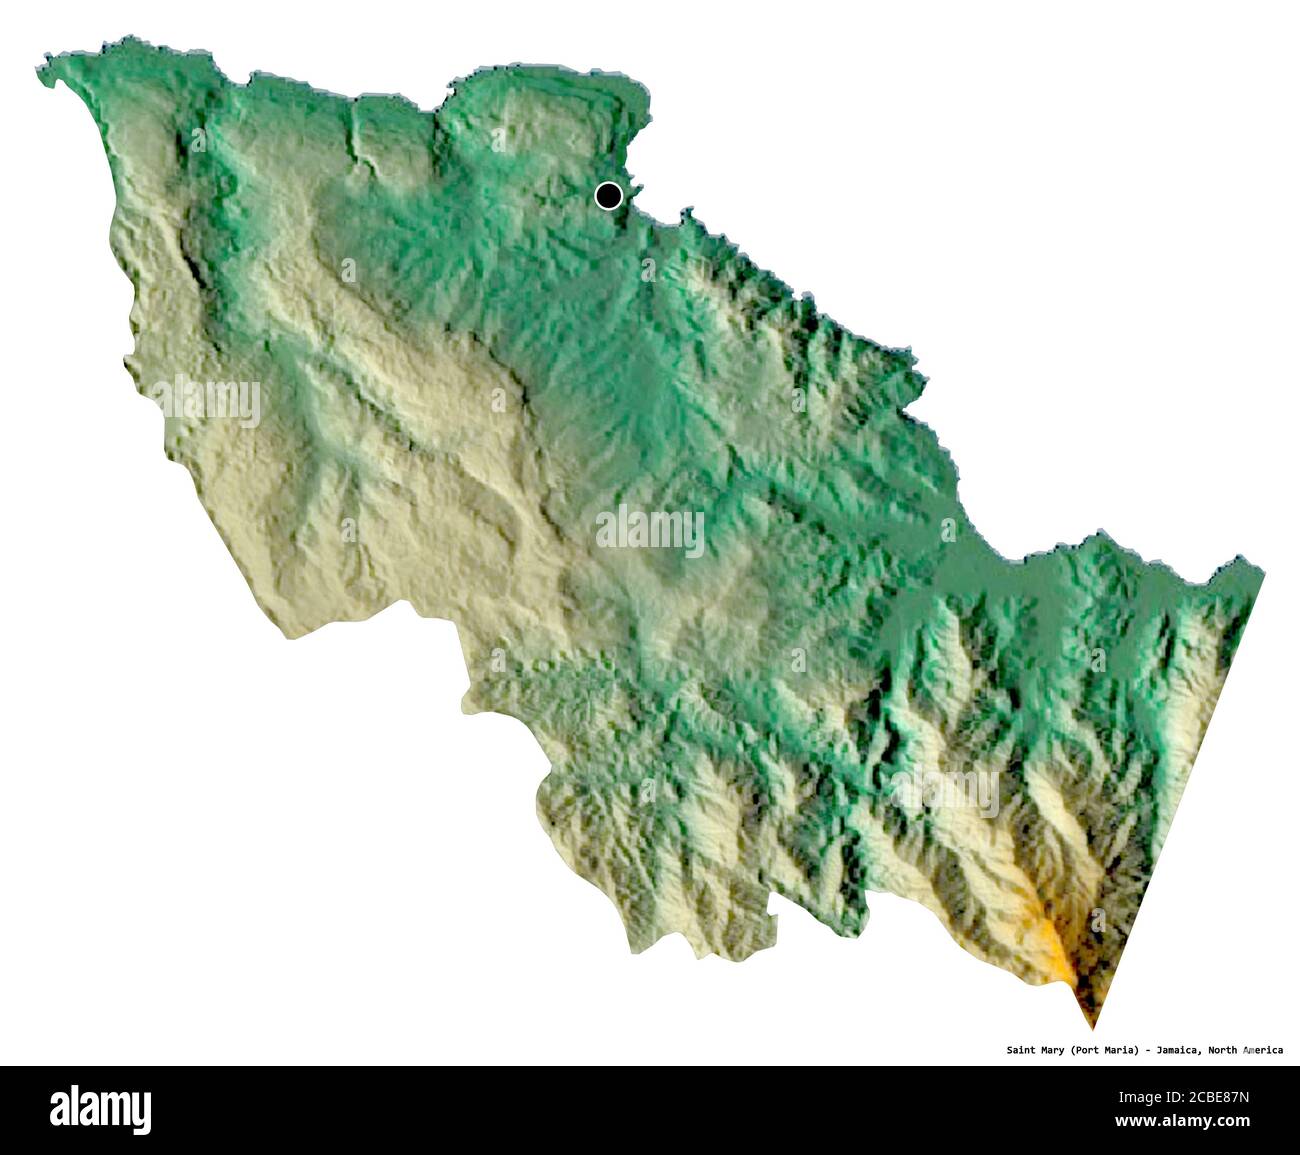 Shape of Saint Mary, parish of Jamaica, with its capital isolated on white background. Topographic relief map. 3D rendering Stock Photo